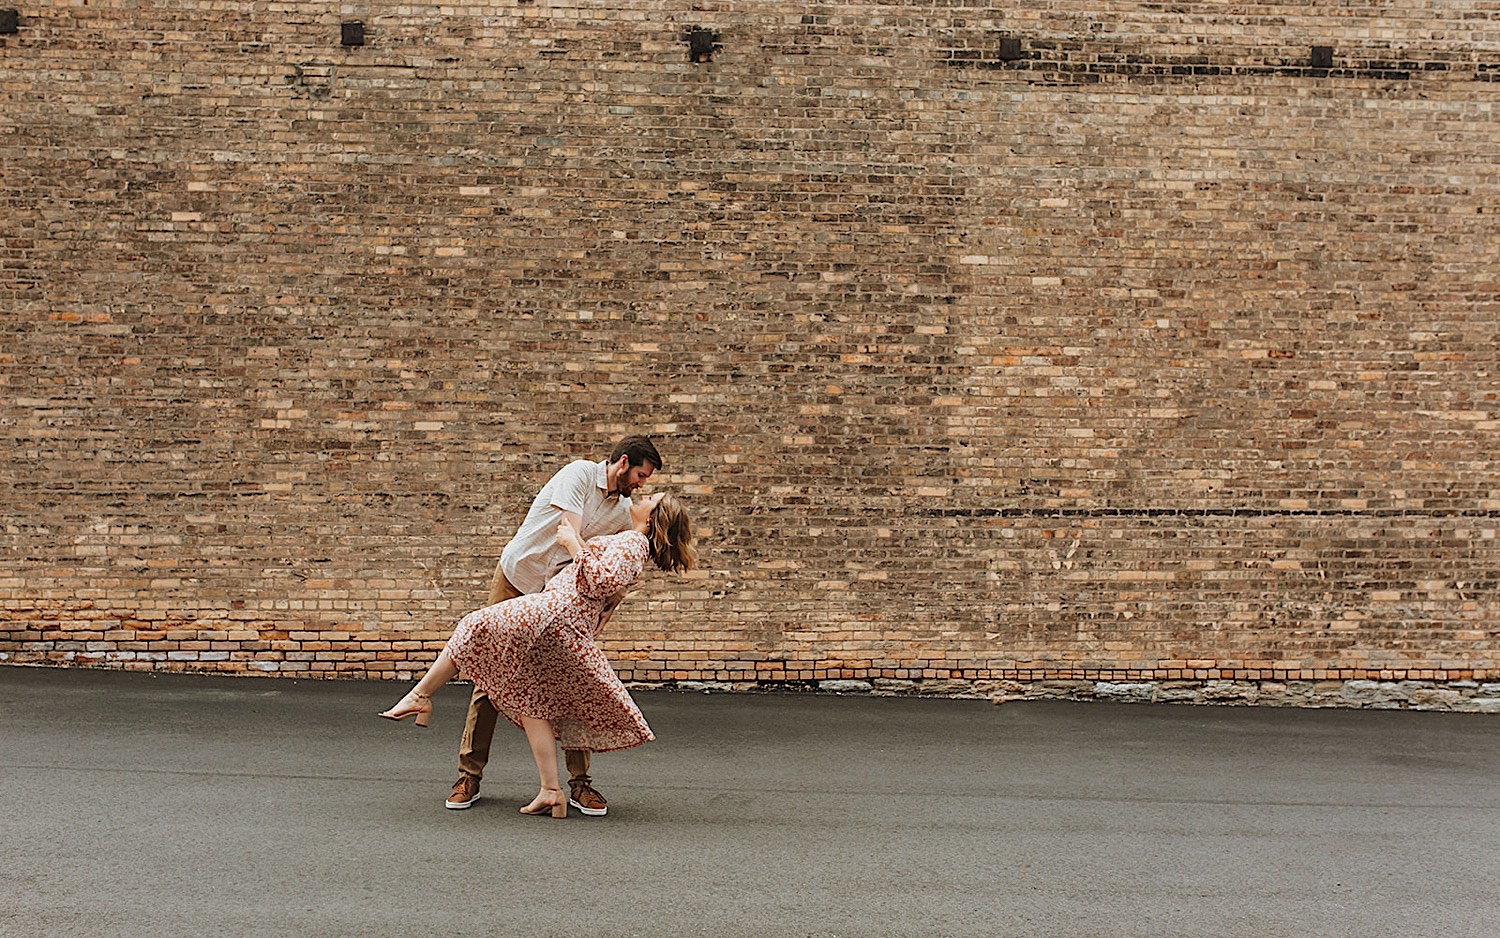 While taking engagement photos in downtown Minneapolis a man dips a woman as the two dance in front of a brick wall